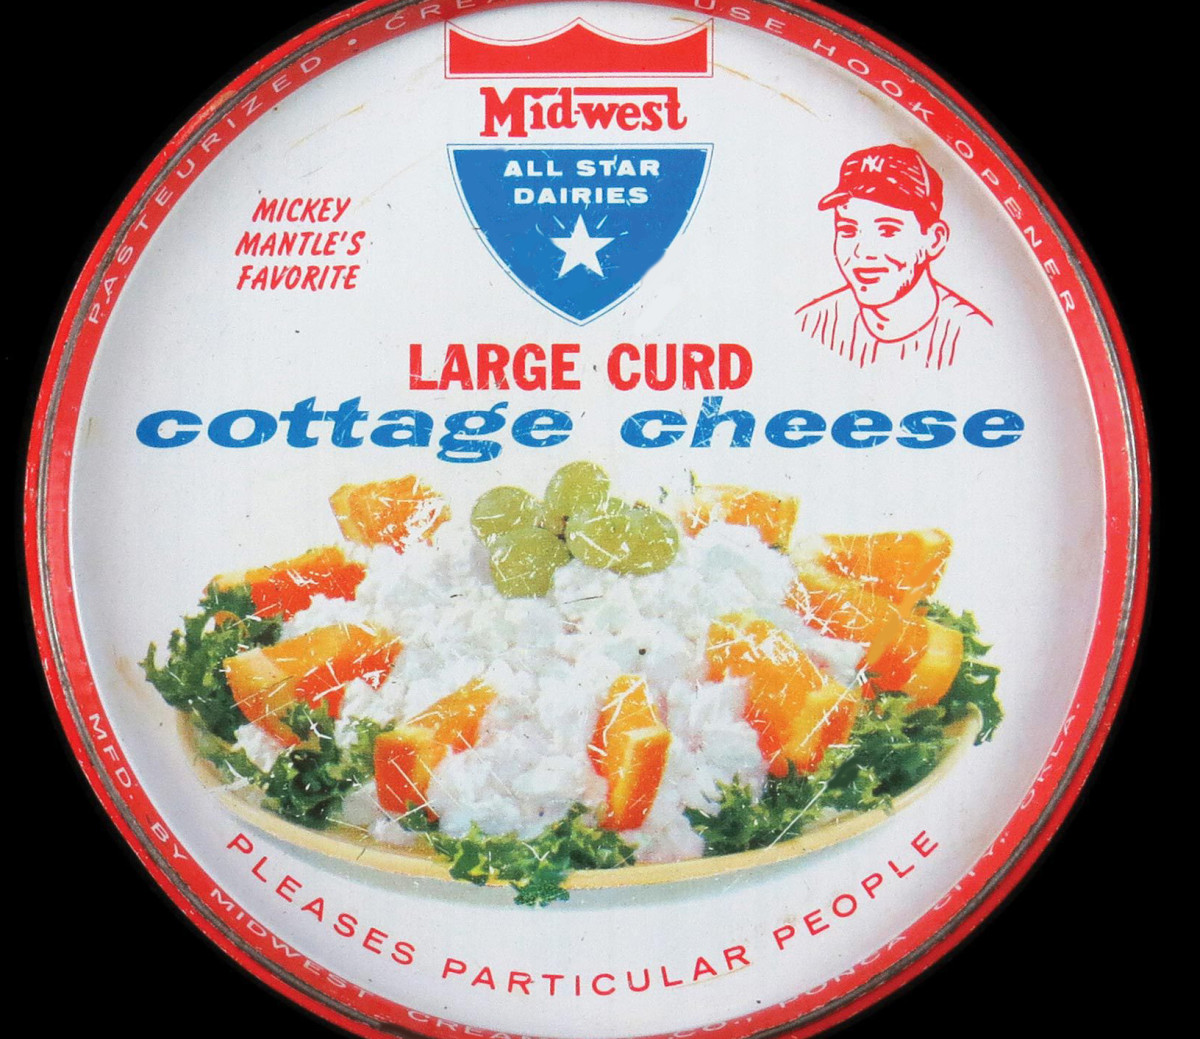 Midwest All Star Dairies cottage cheese lid featuring Mickey Mantle's image.